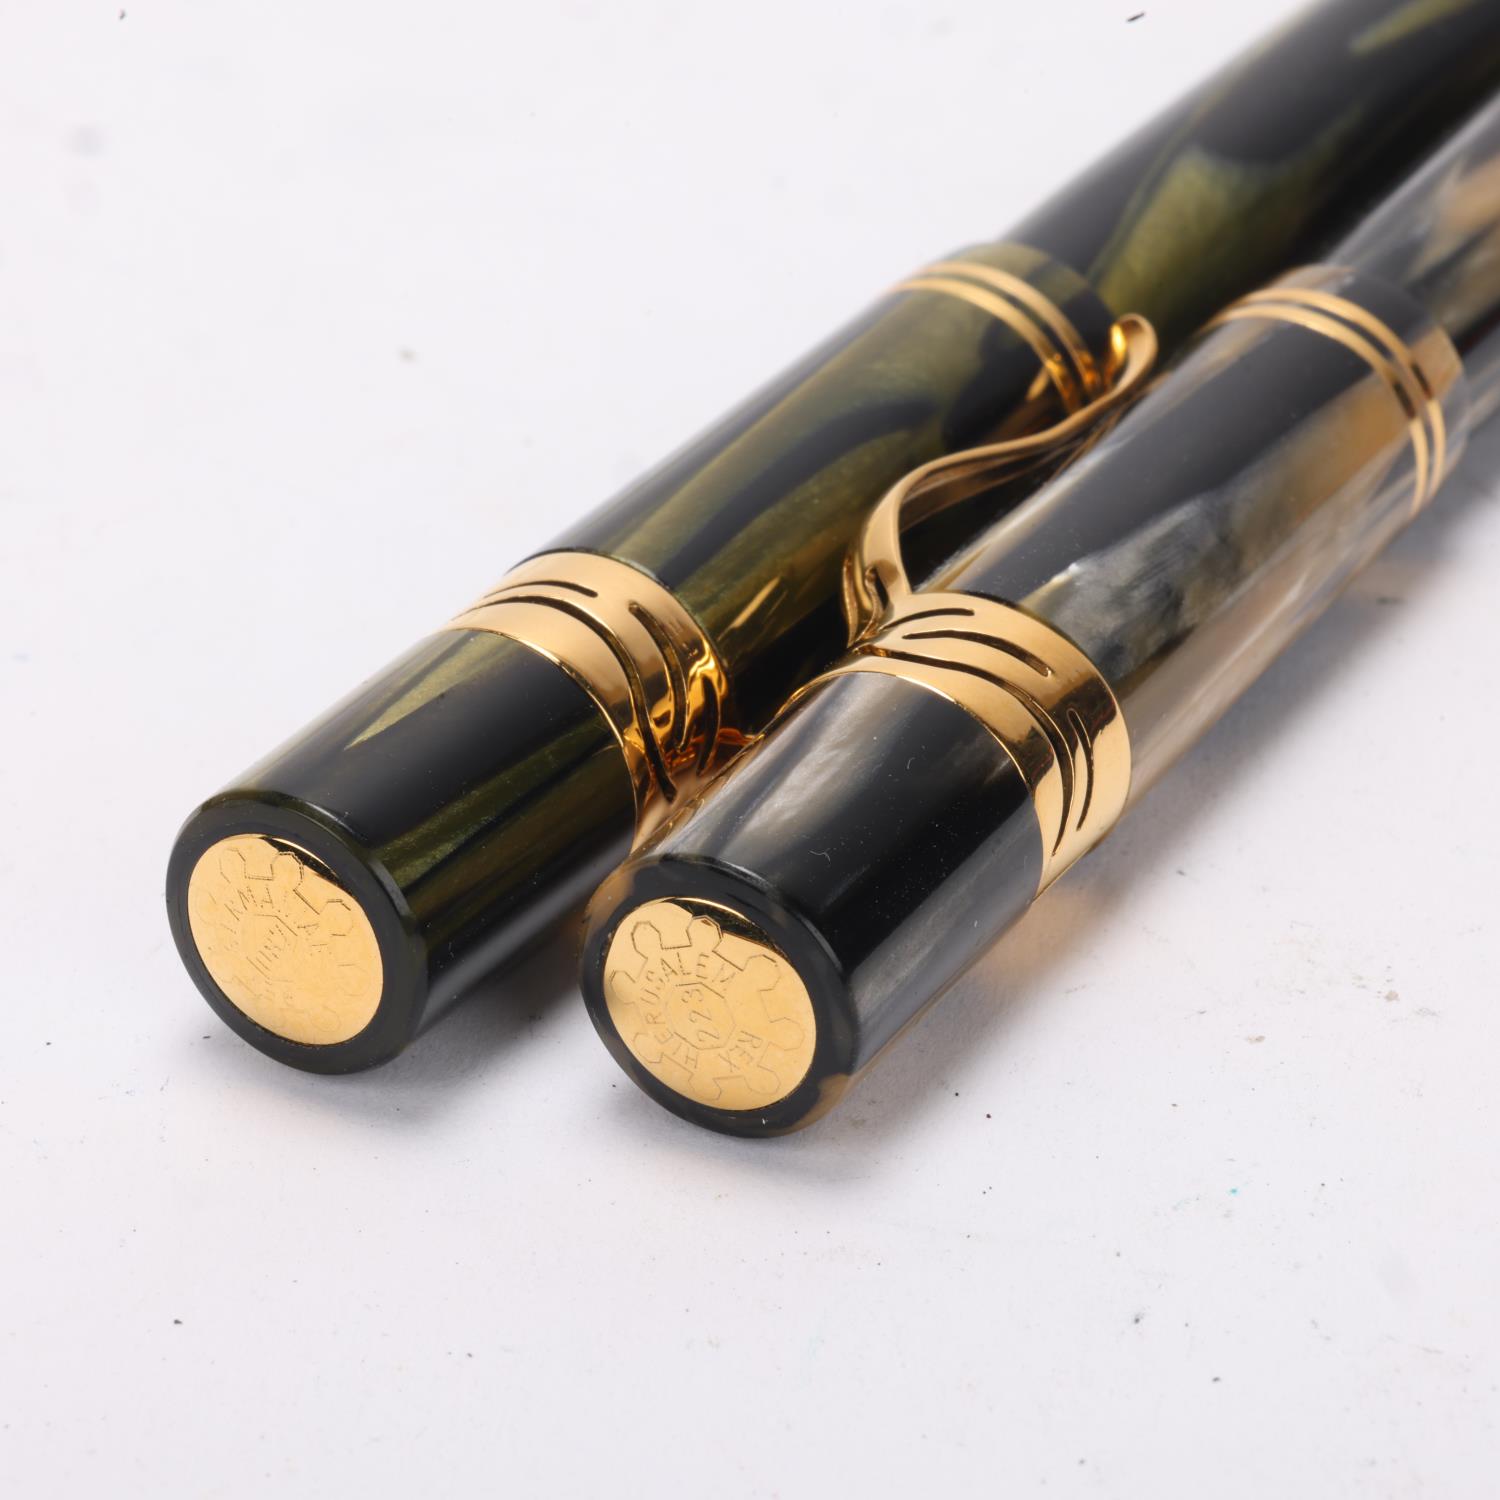 2 Visconti "Frederico II" fountain pens, piston fill with marbled body, limited edition of 800, both - Image 4 of 4